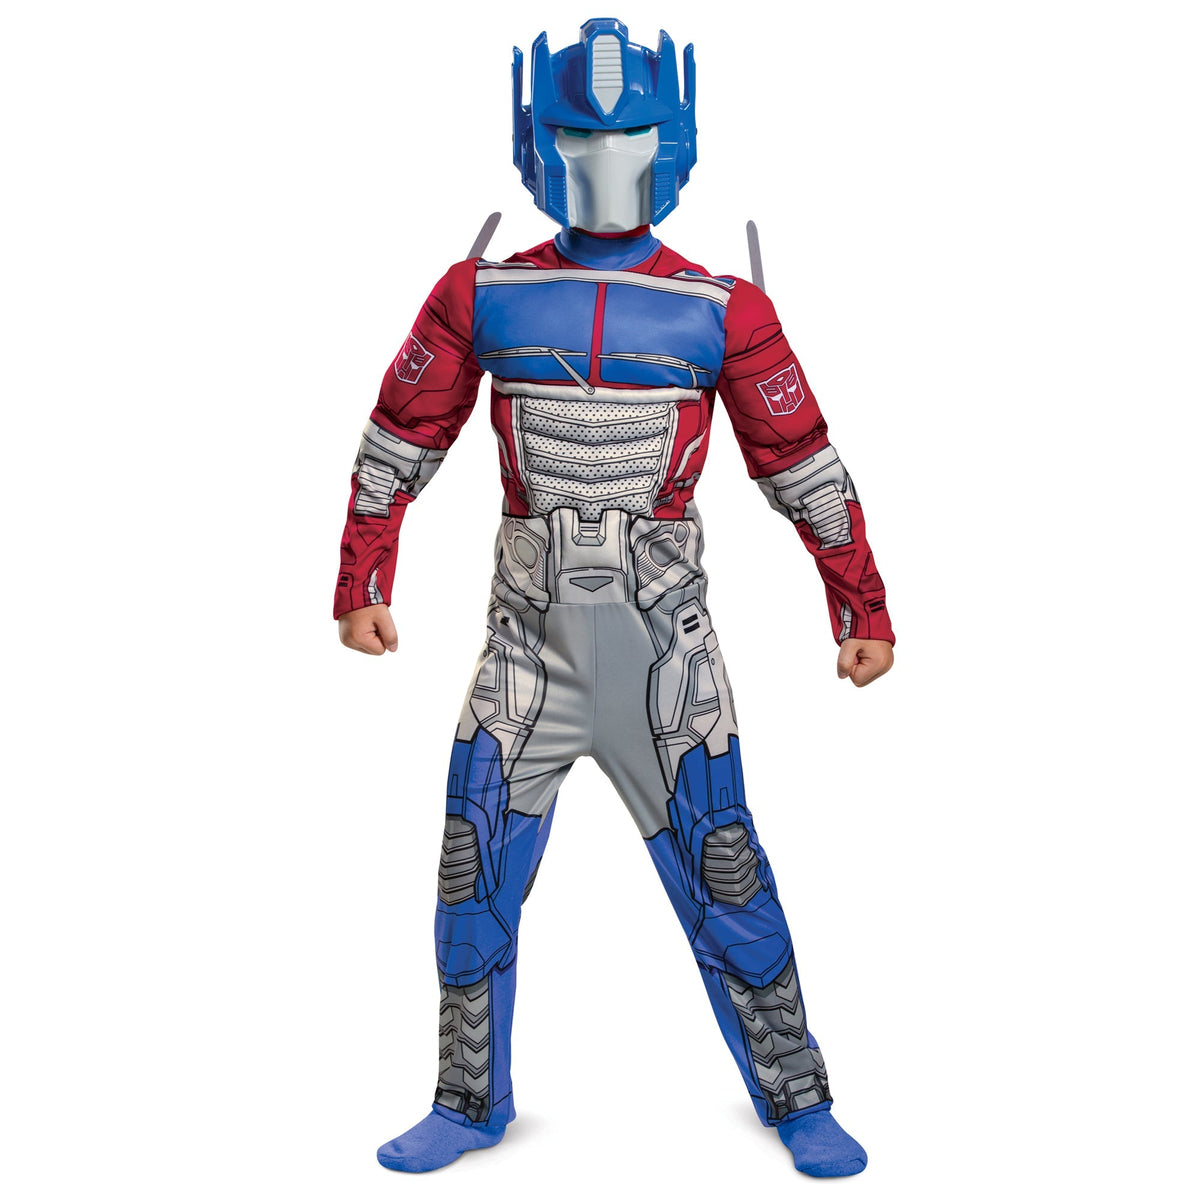 TOY-SPORT Costumes Optimus Prime Muscle Costume for Kids, Transformers